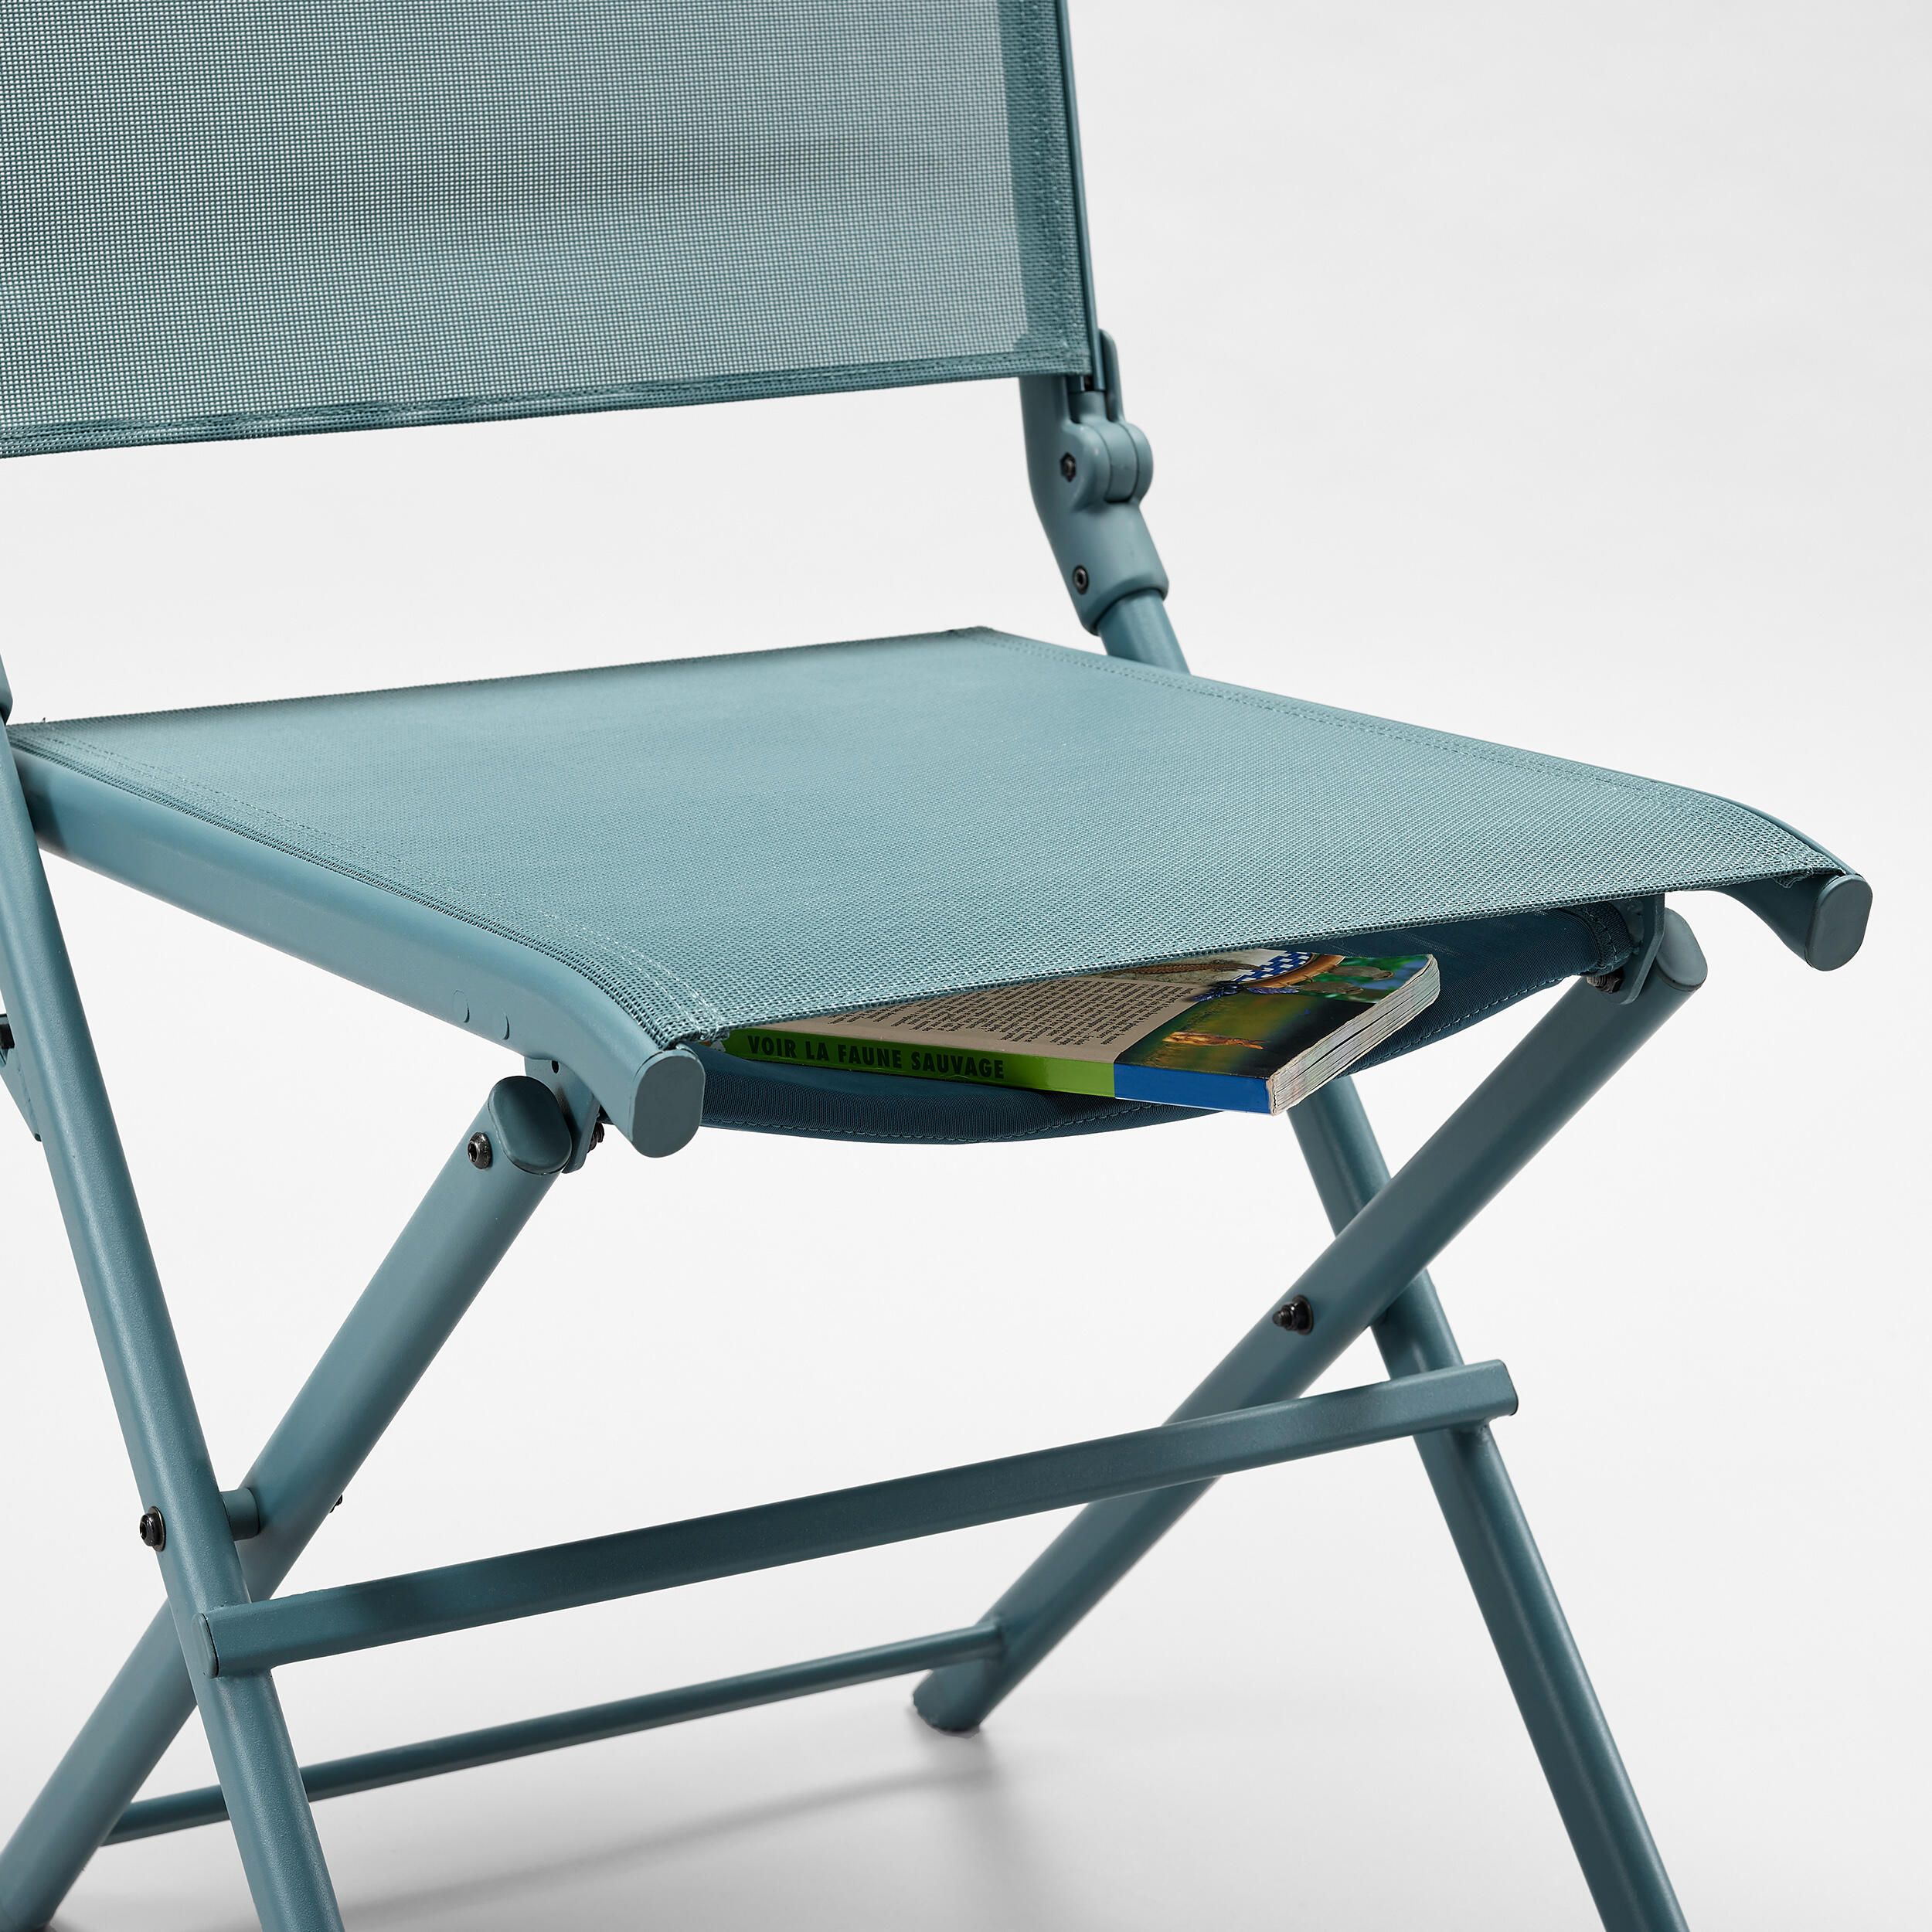 Camping Double Position Comfort Chair 6/7